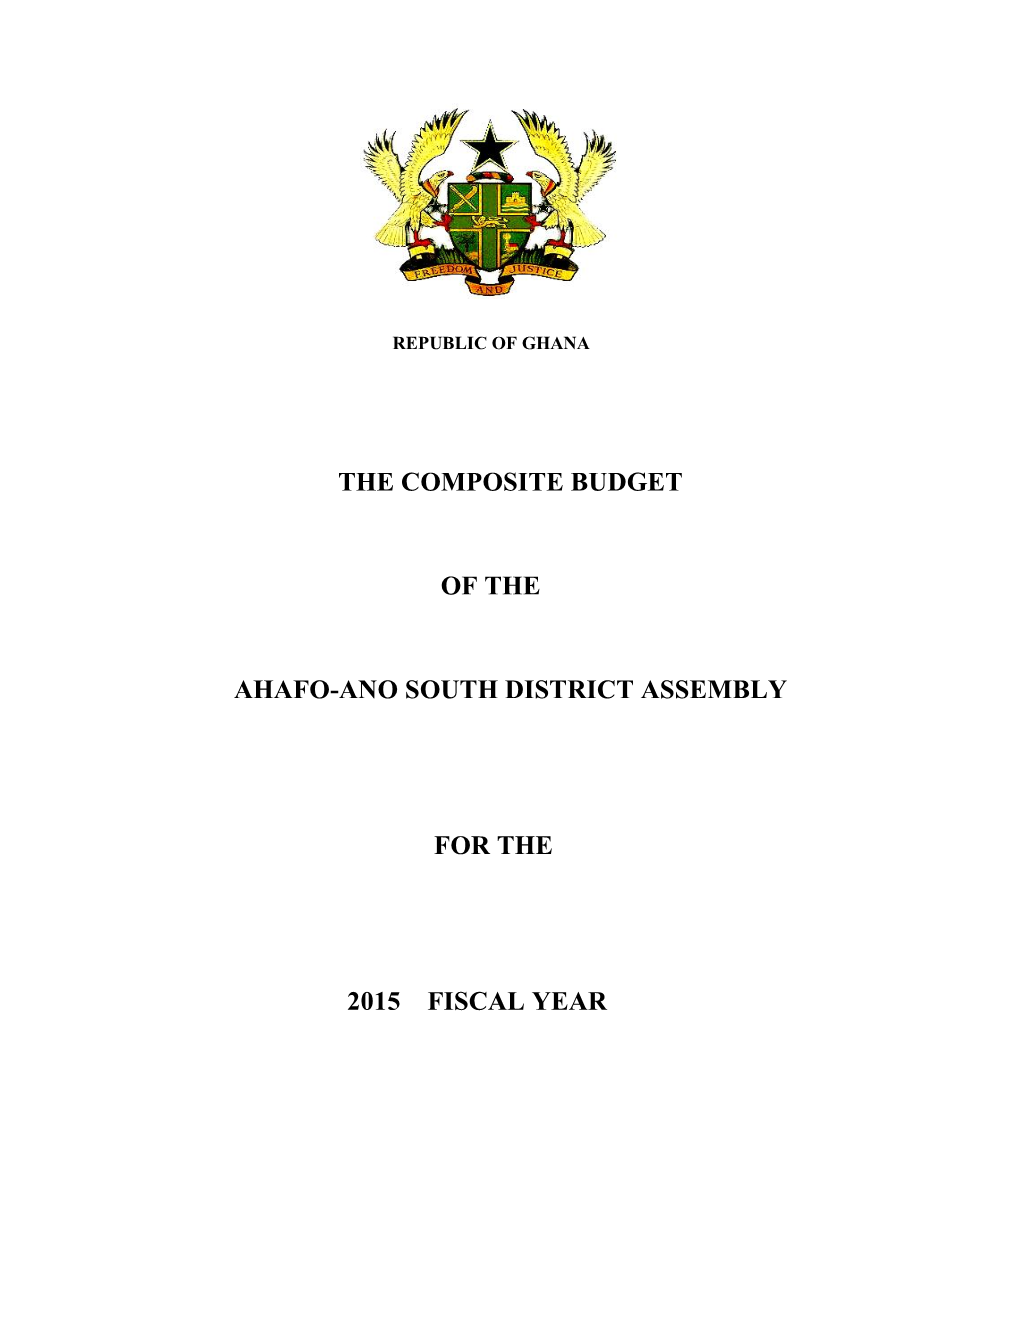 The Composite Budget of the Ahafo-Ano South District Assembly